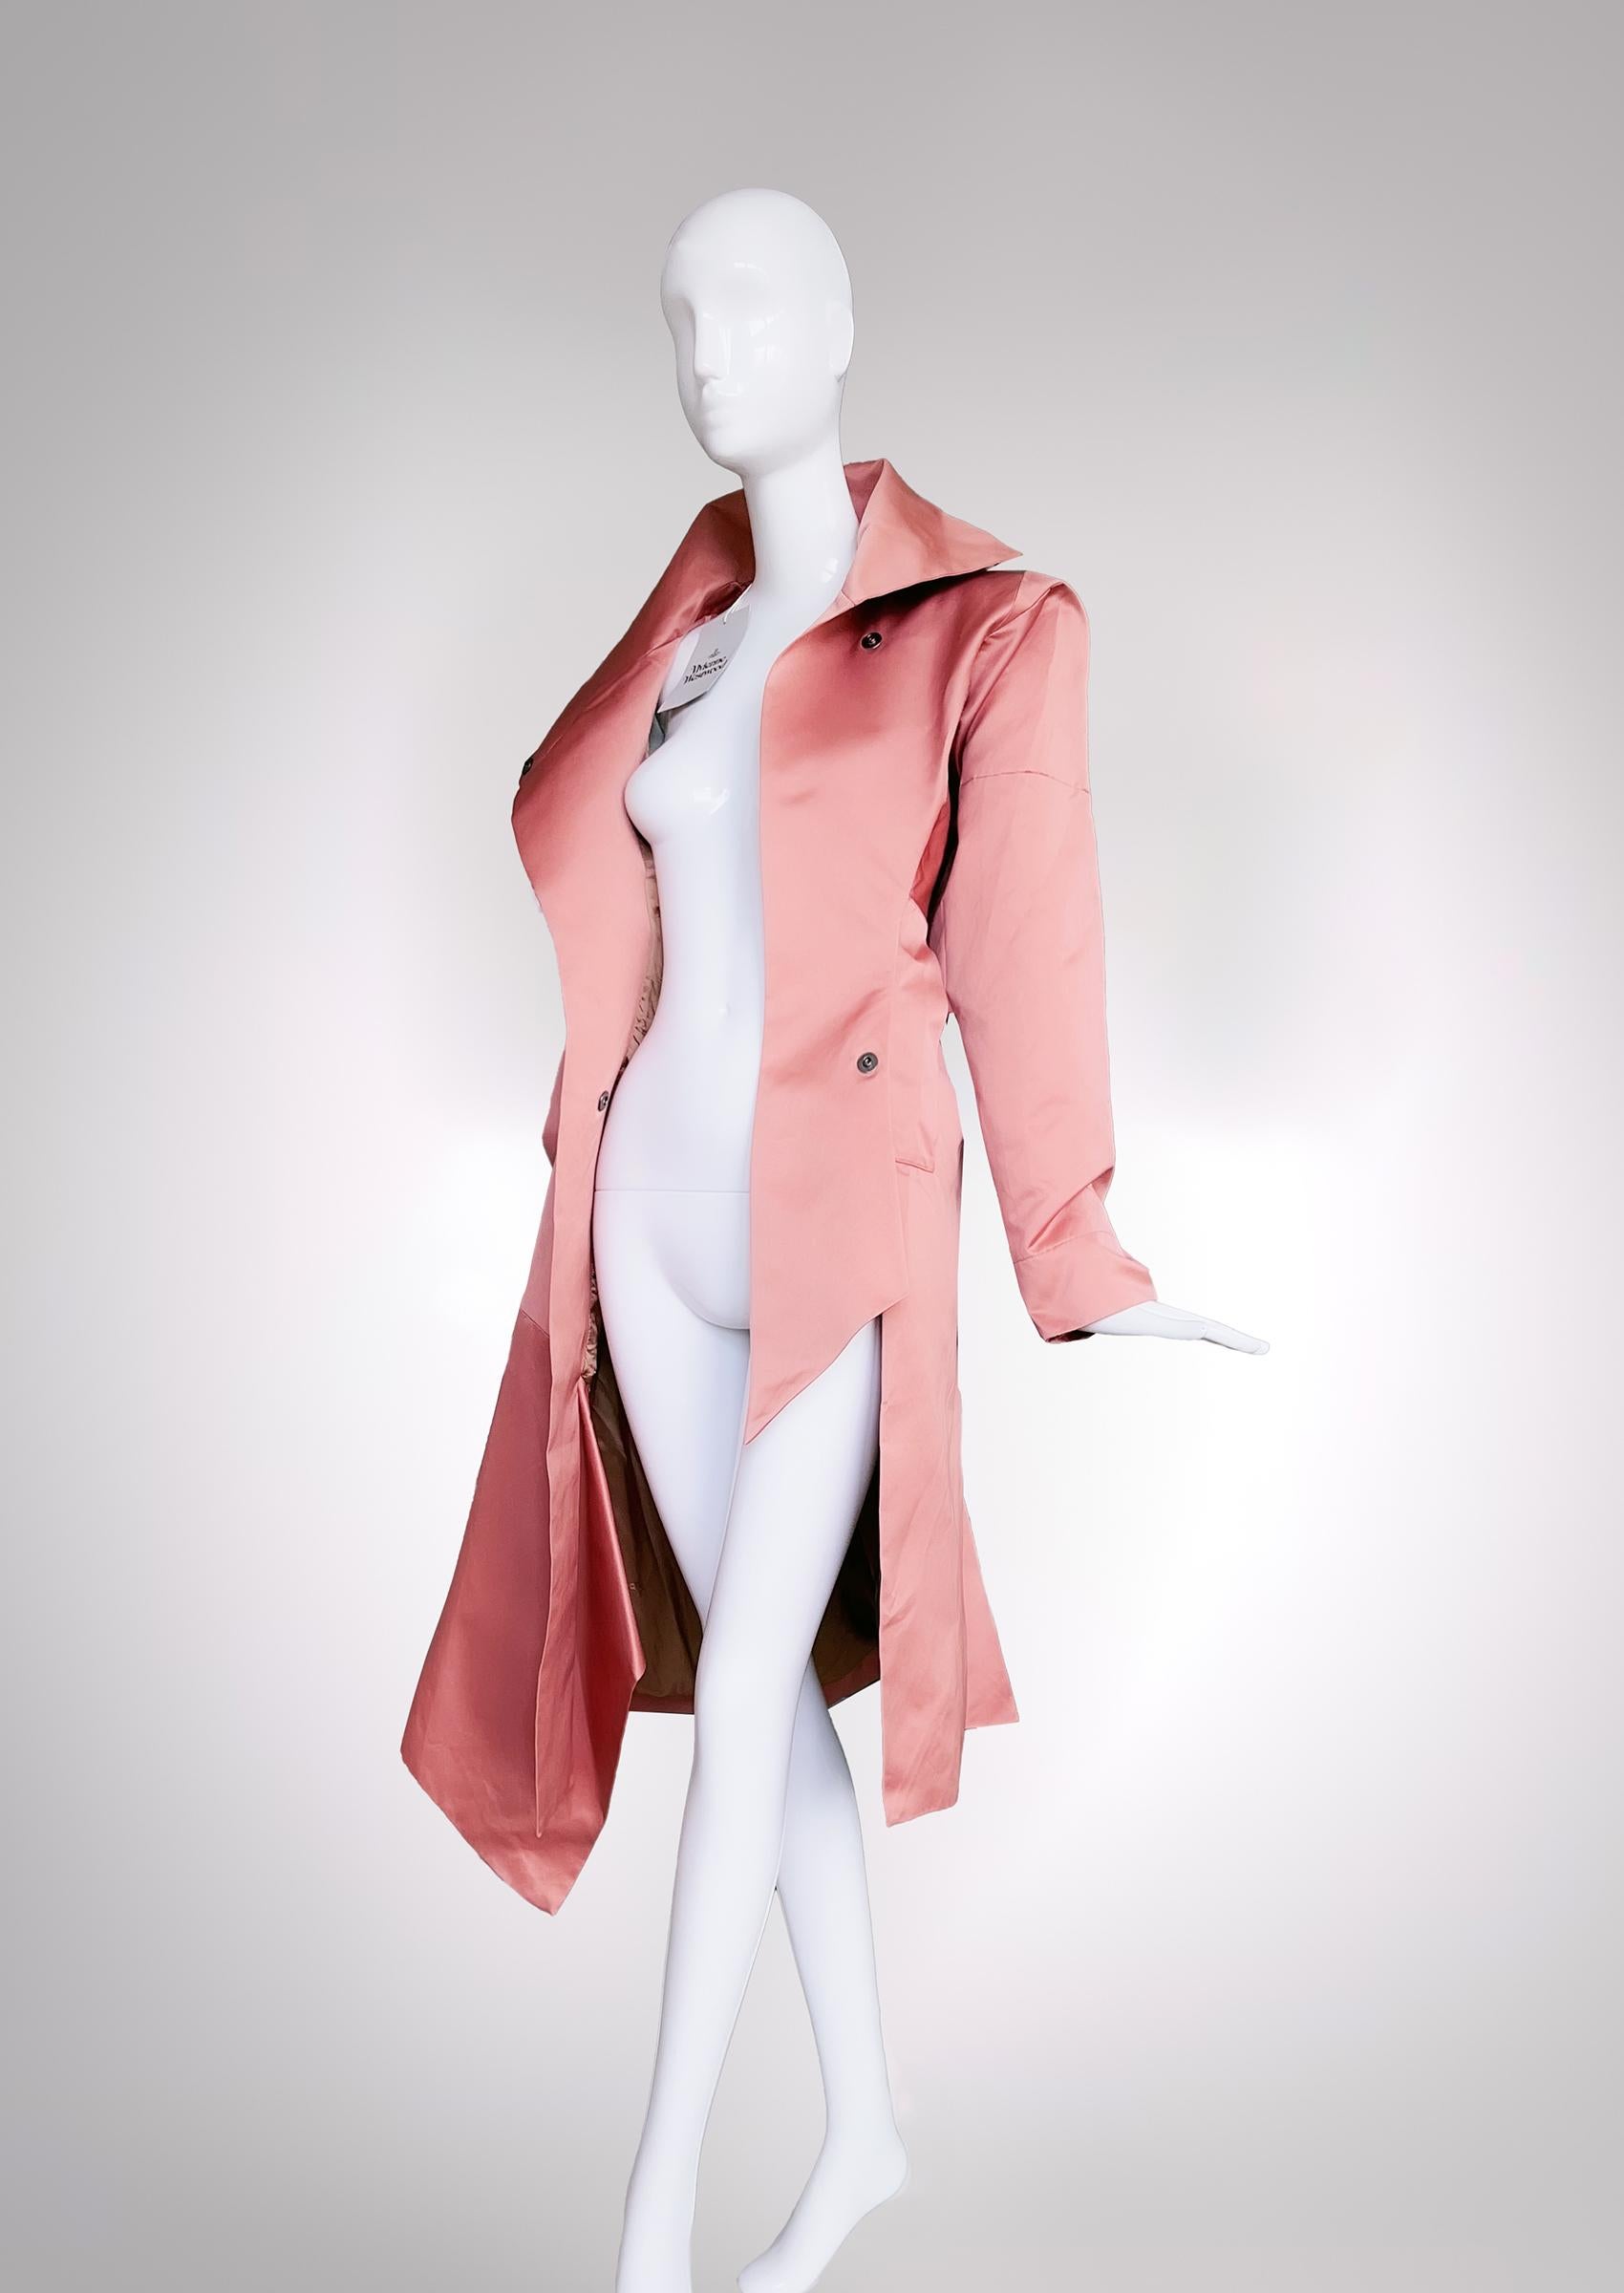 Vivienne Westwood BAT COAT, SS 2021 Collection

Stunning dramatic long jacket/coat in rose gold/copper silky satin. Fabulous typical Vivienne Westwood asymmetrical construction and exquisite tailoring. The dramatic collar can be worn in different